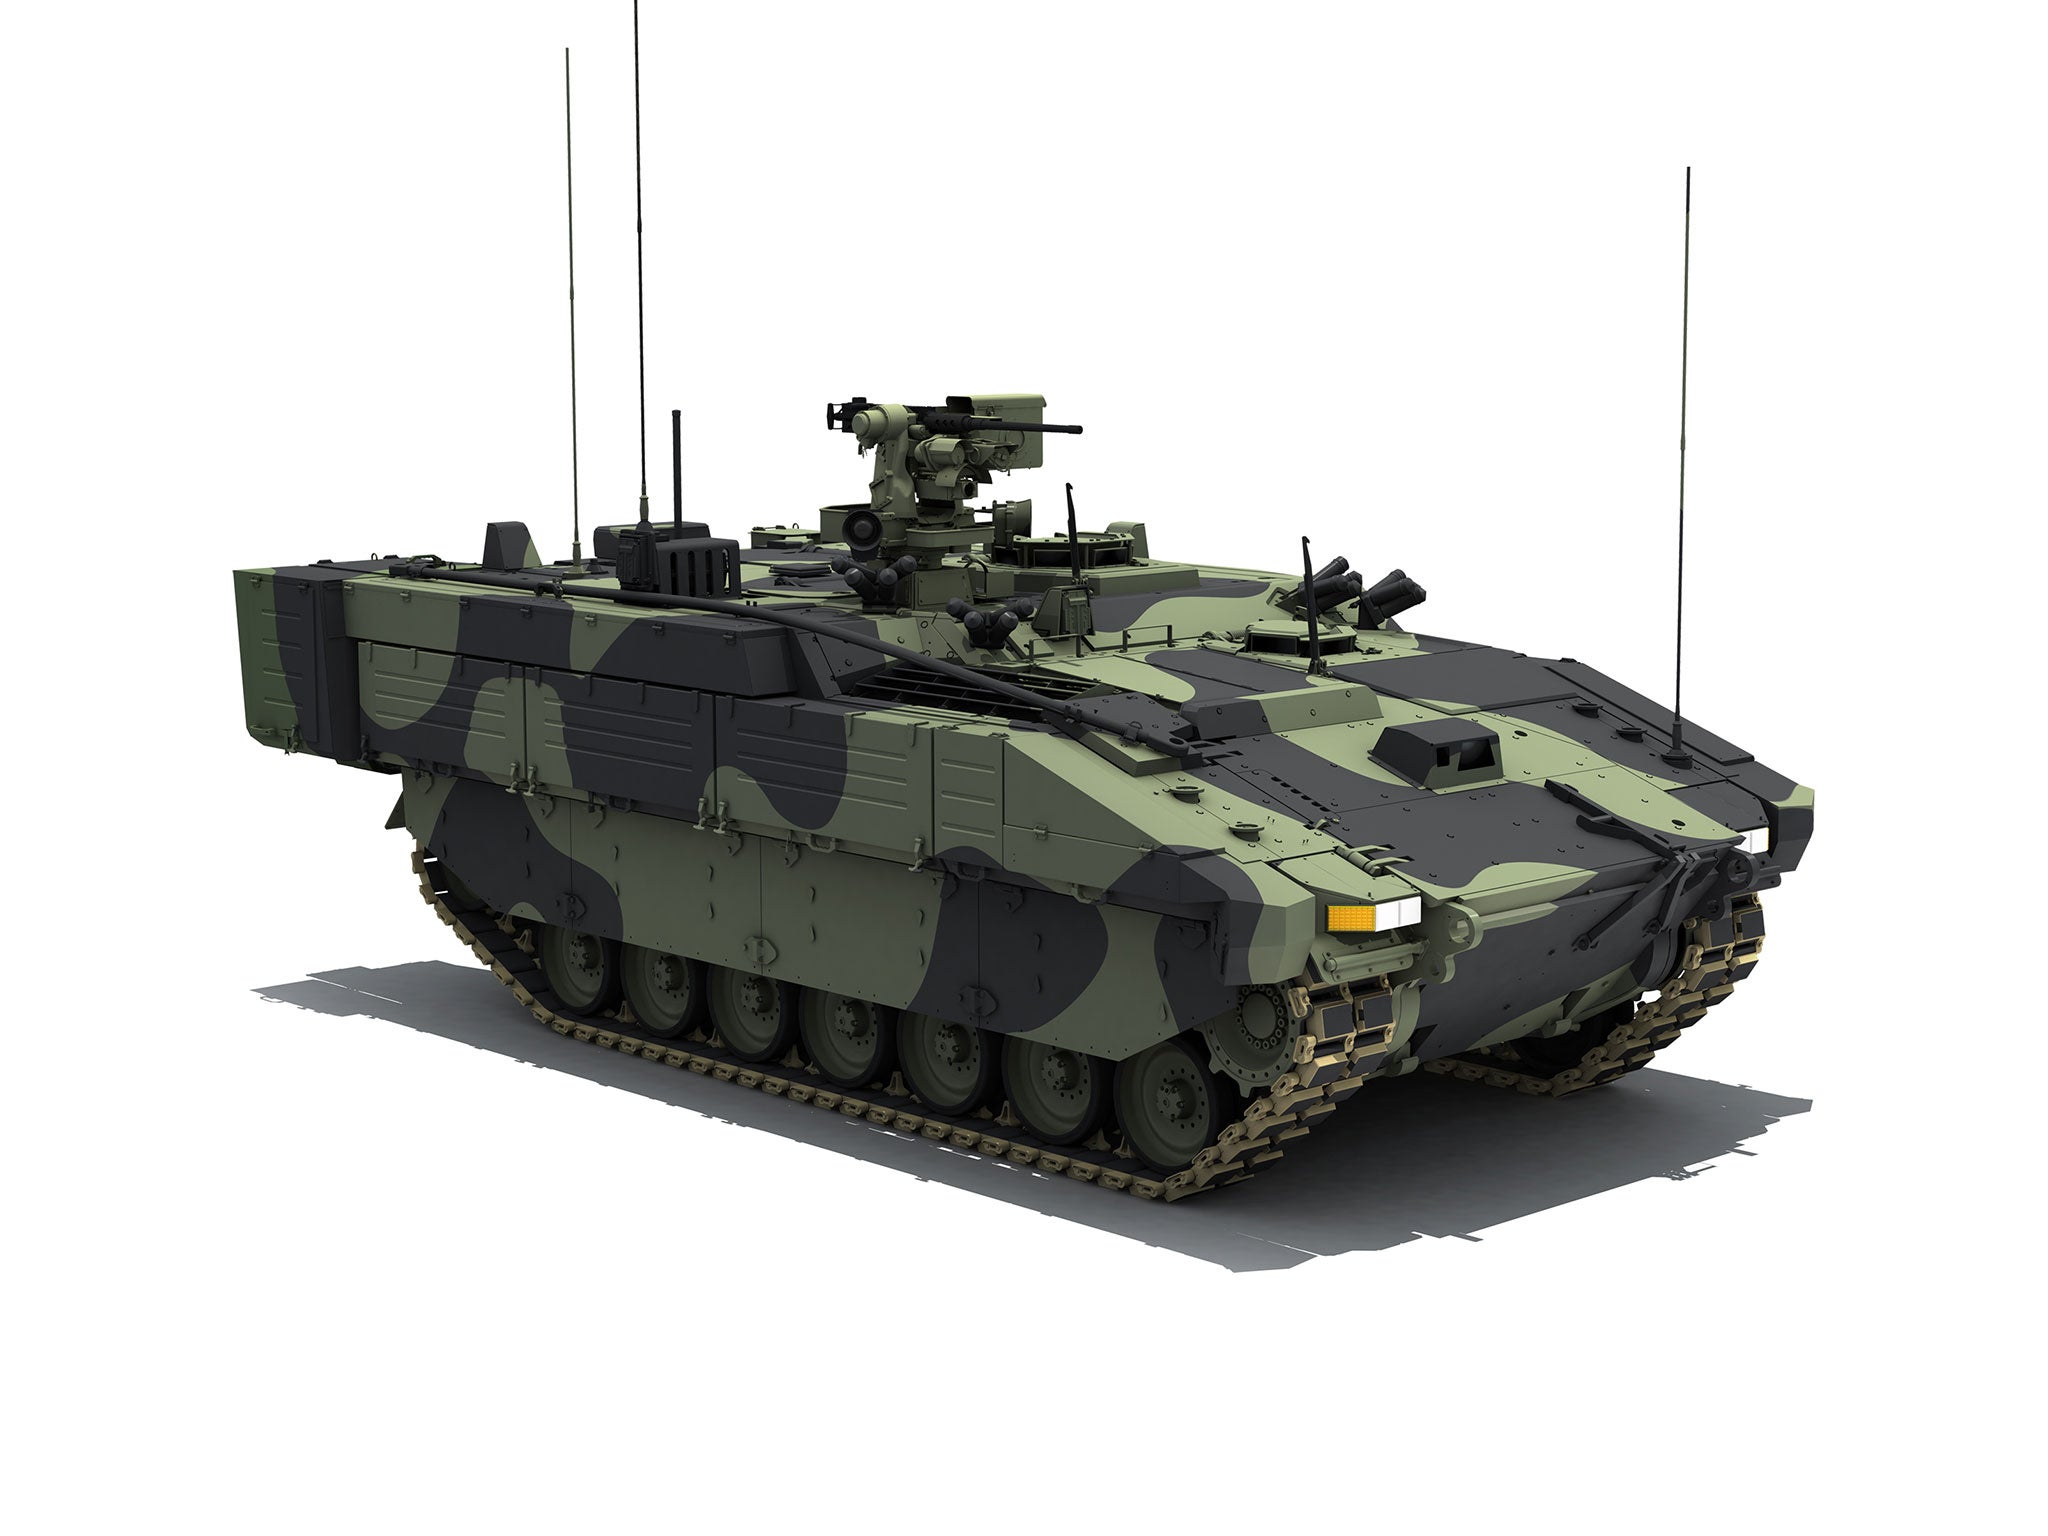 The British Army has signed a £3.5 billion deal for nearly 600 of the new armoured vehicles